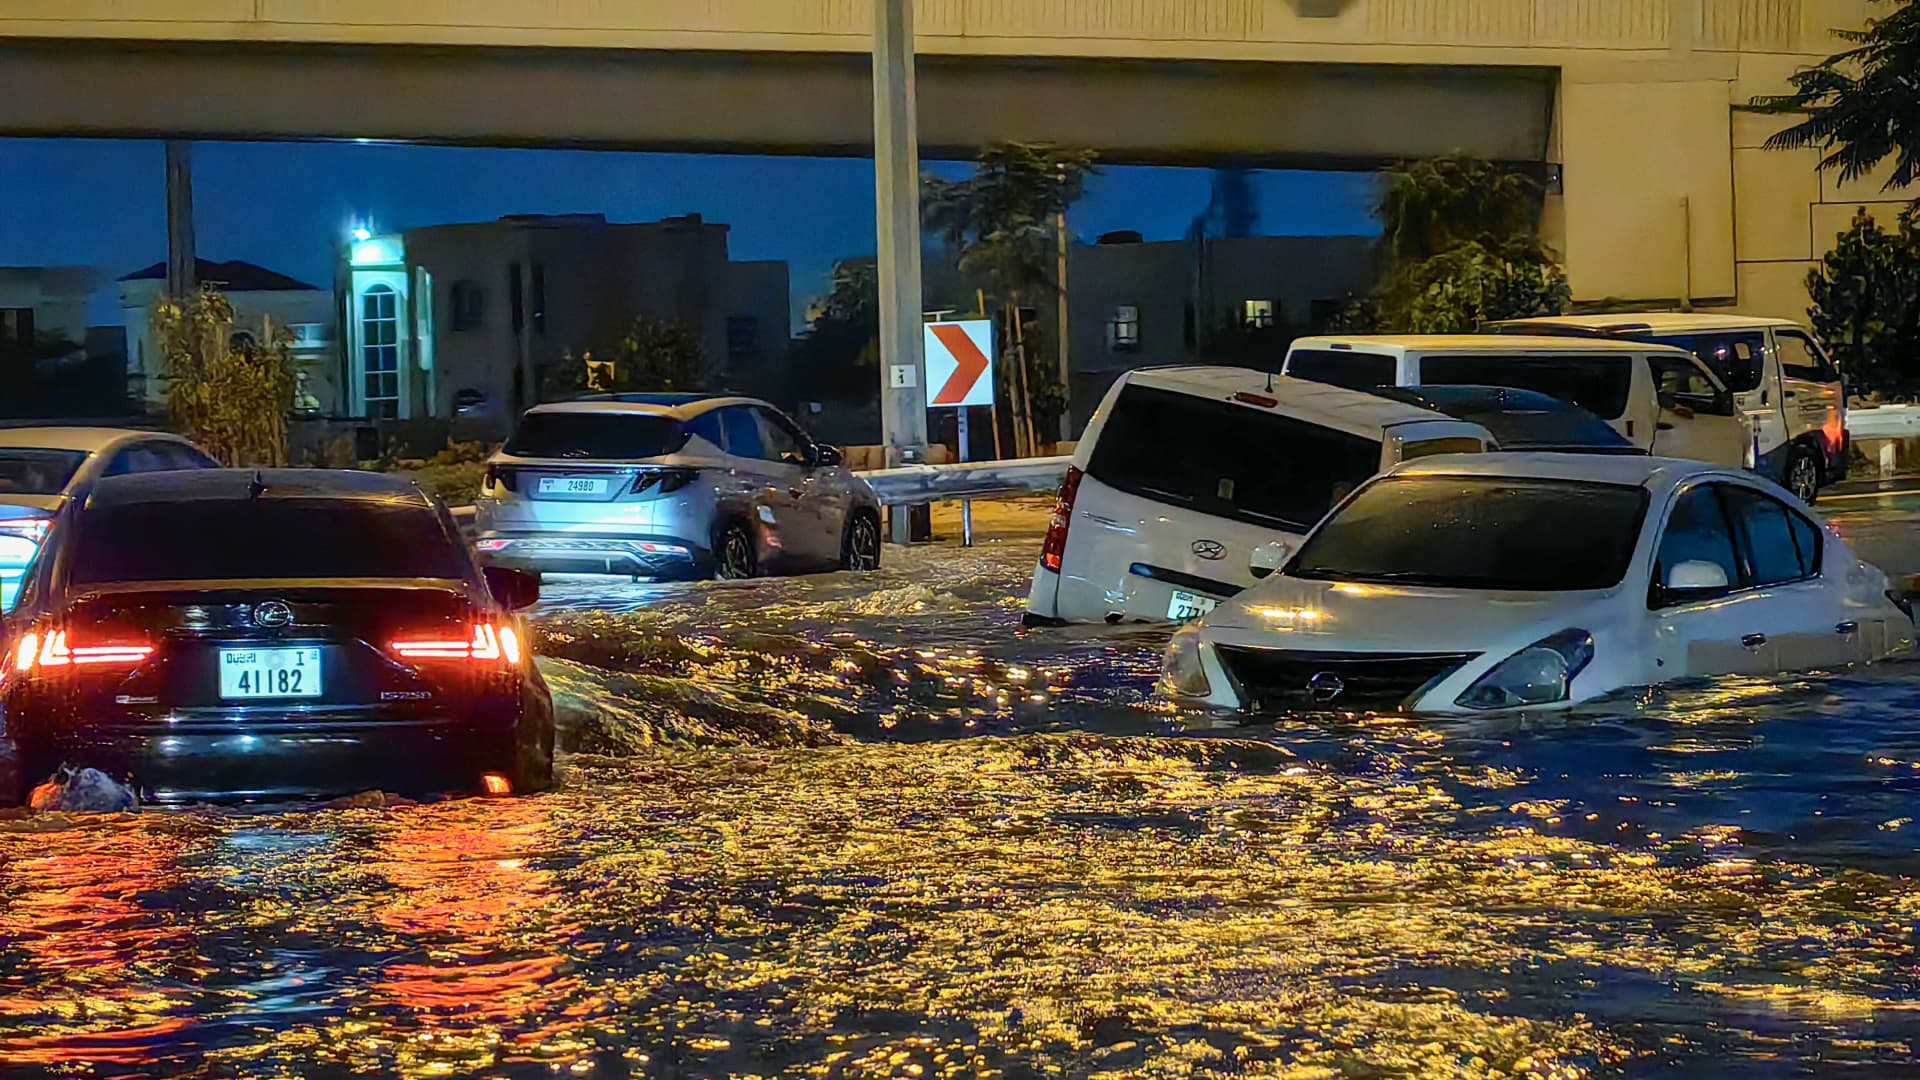 Dubai Damac property boss says floods have been overexaggerated